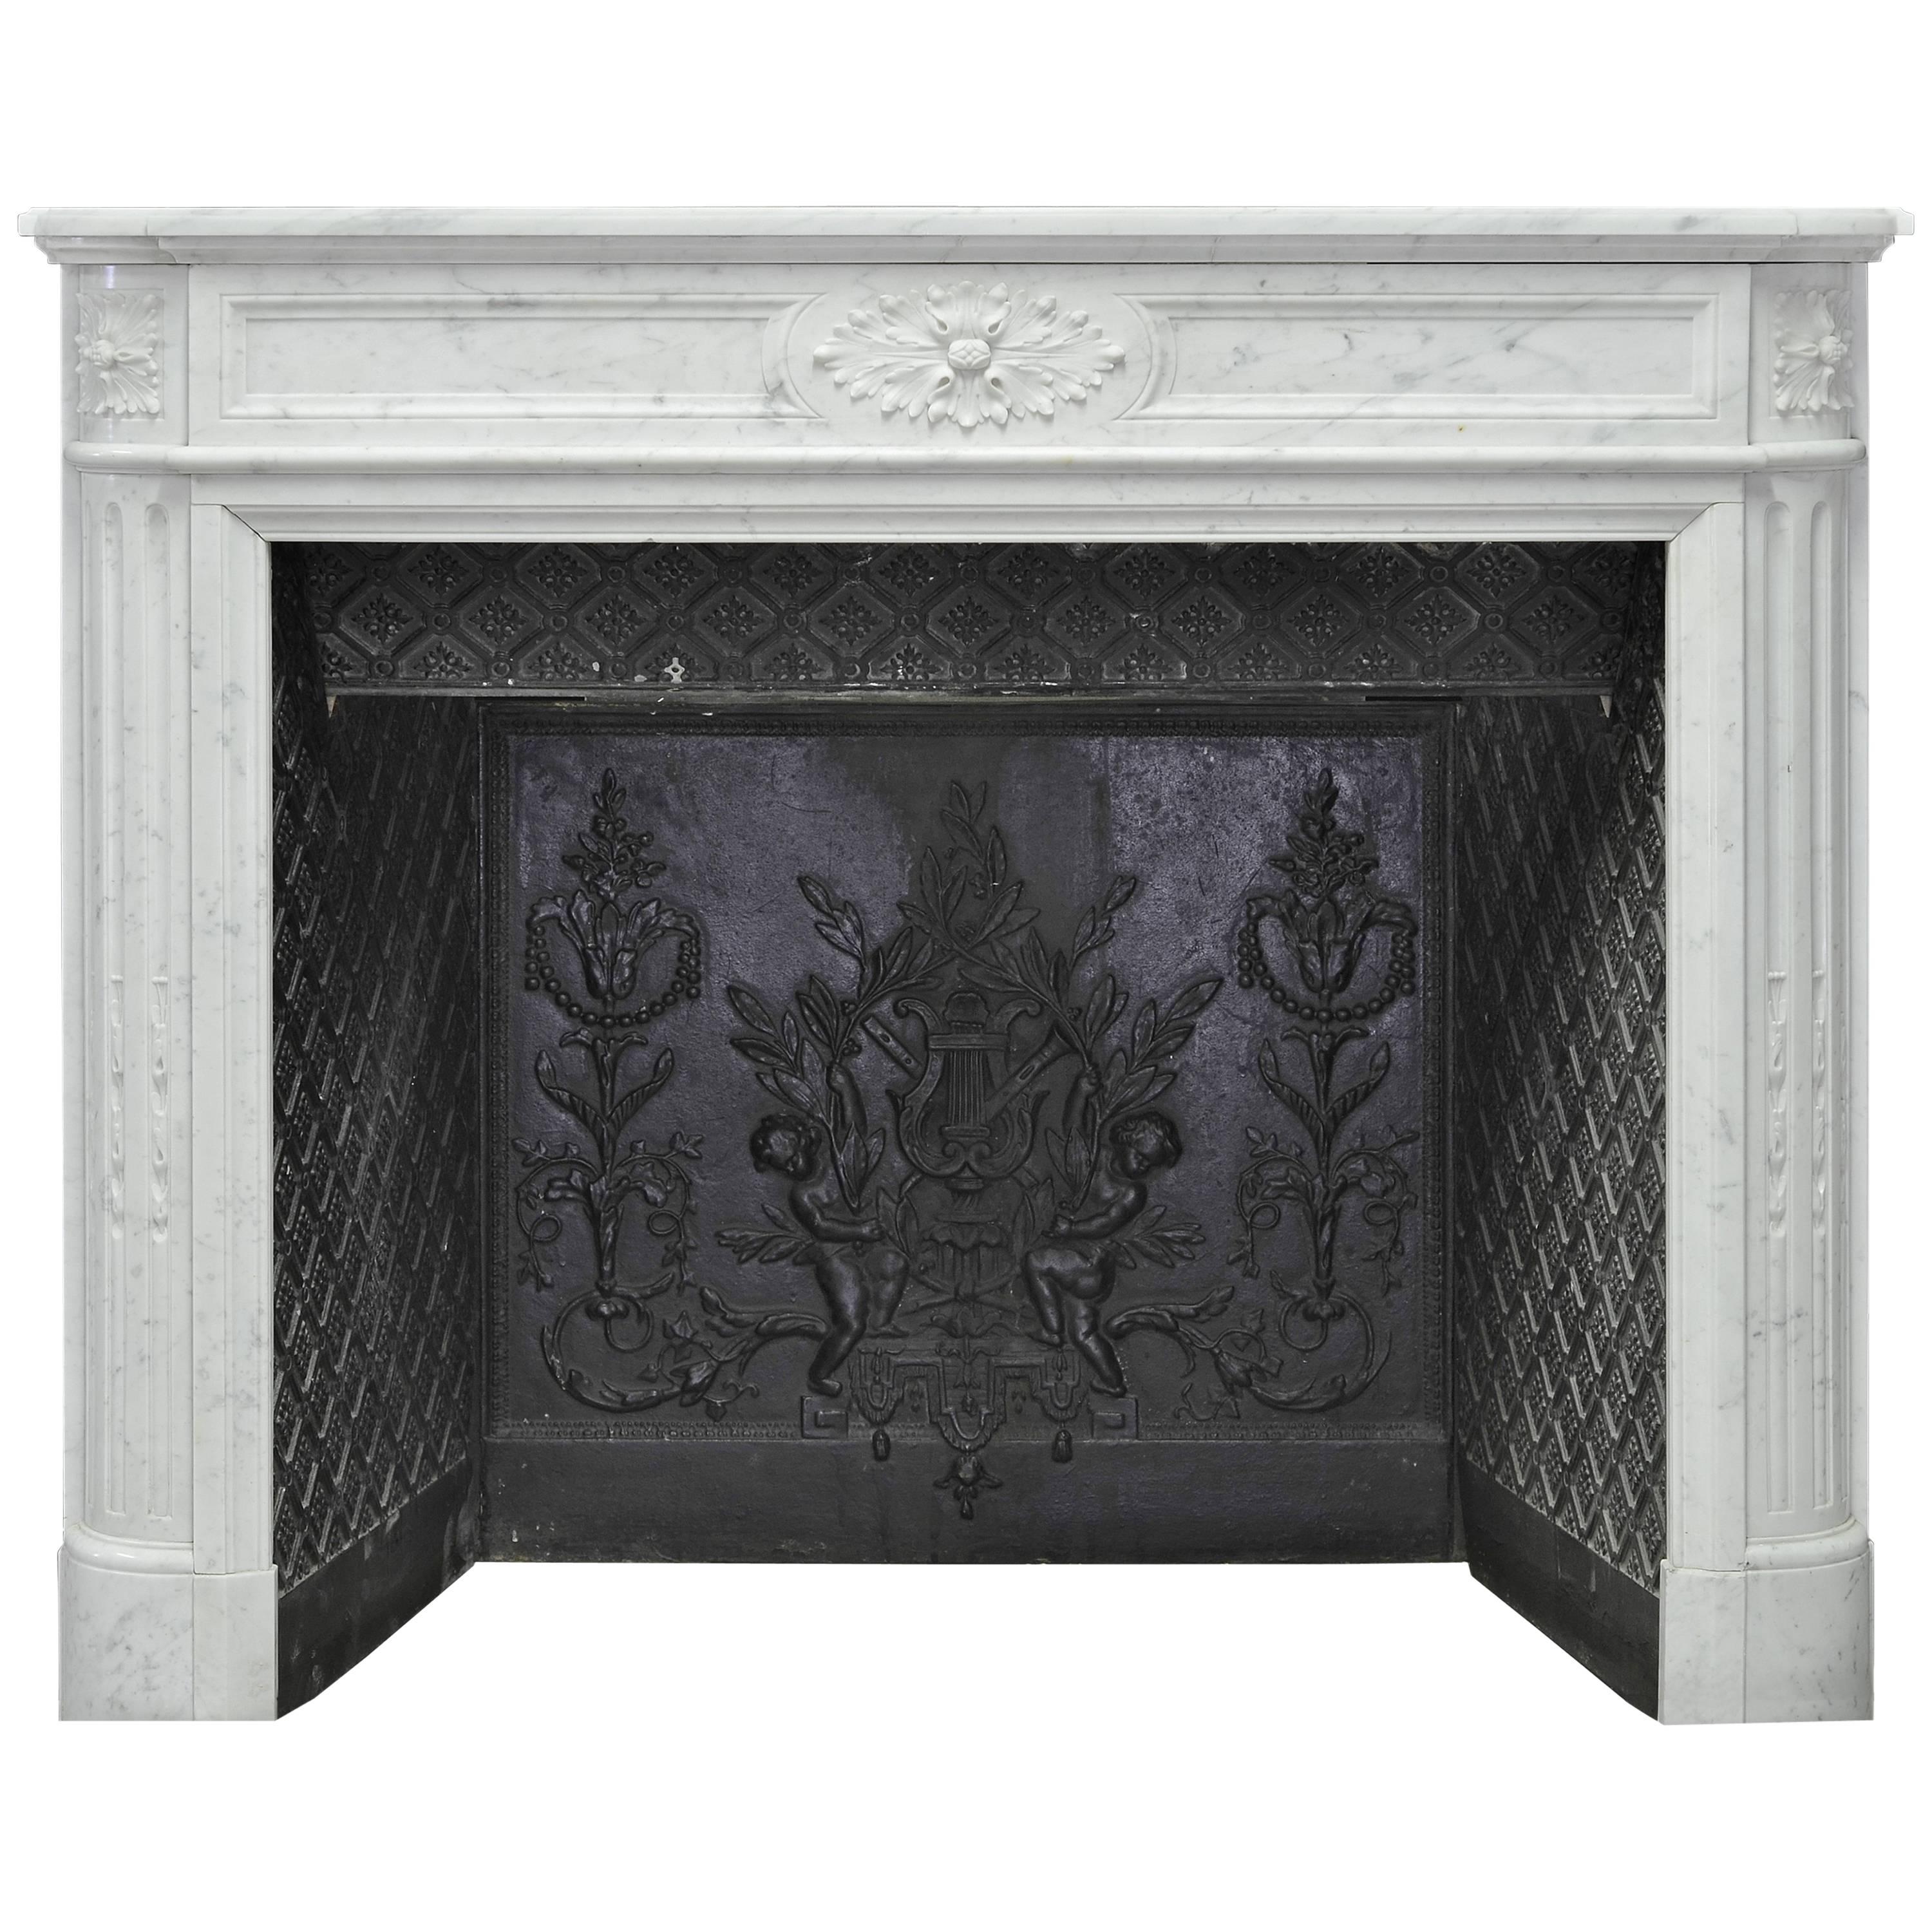 Antique Fireplace in Carara Marble, Louis XVI Style, 19th Century, Paris, France